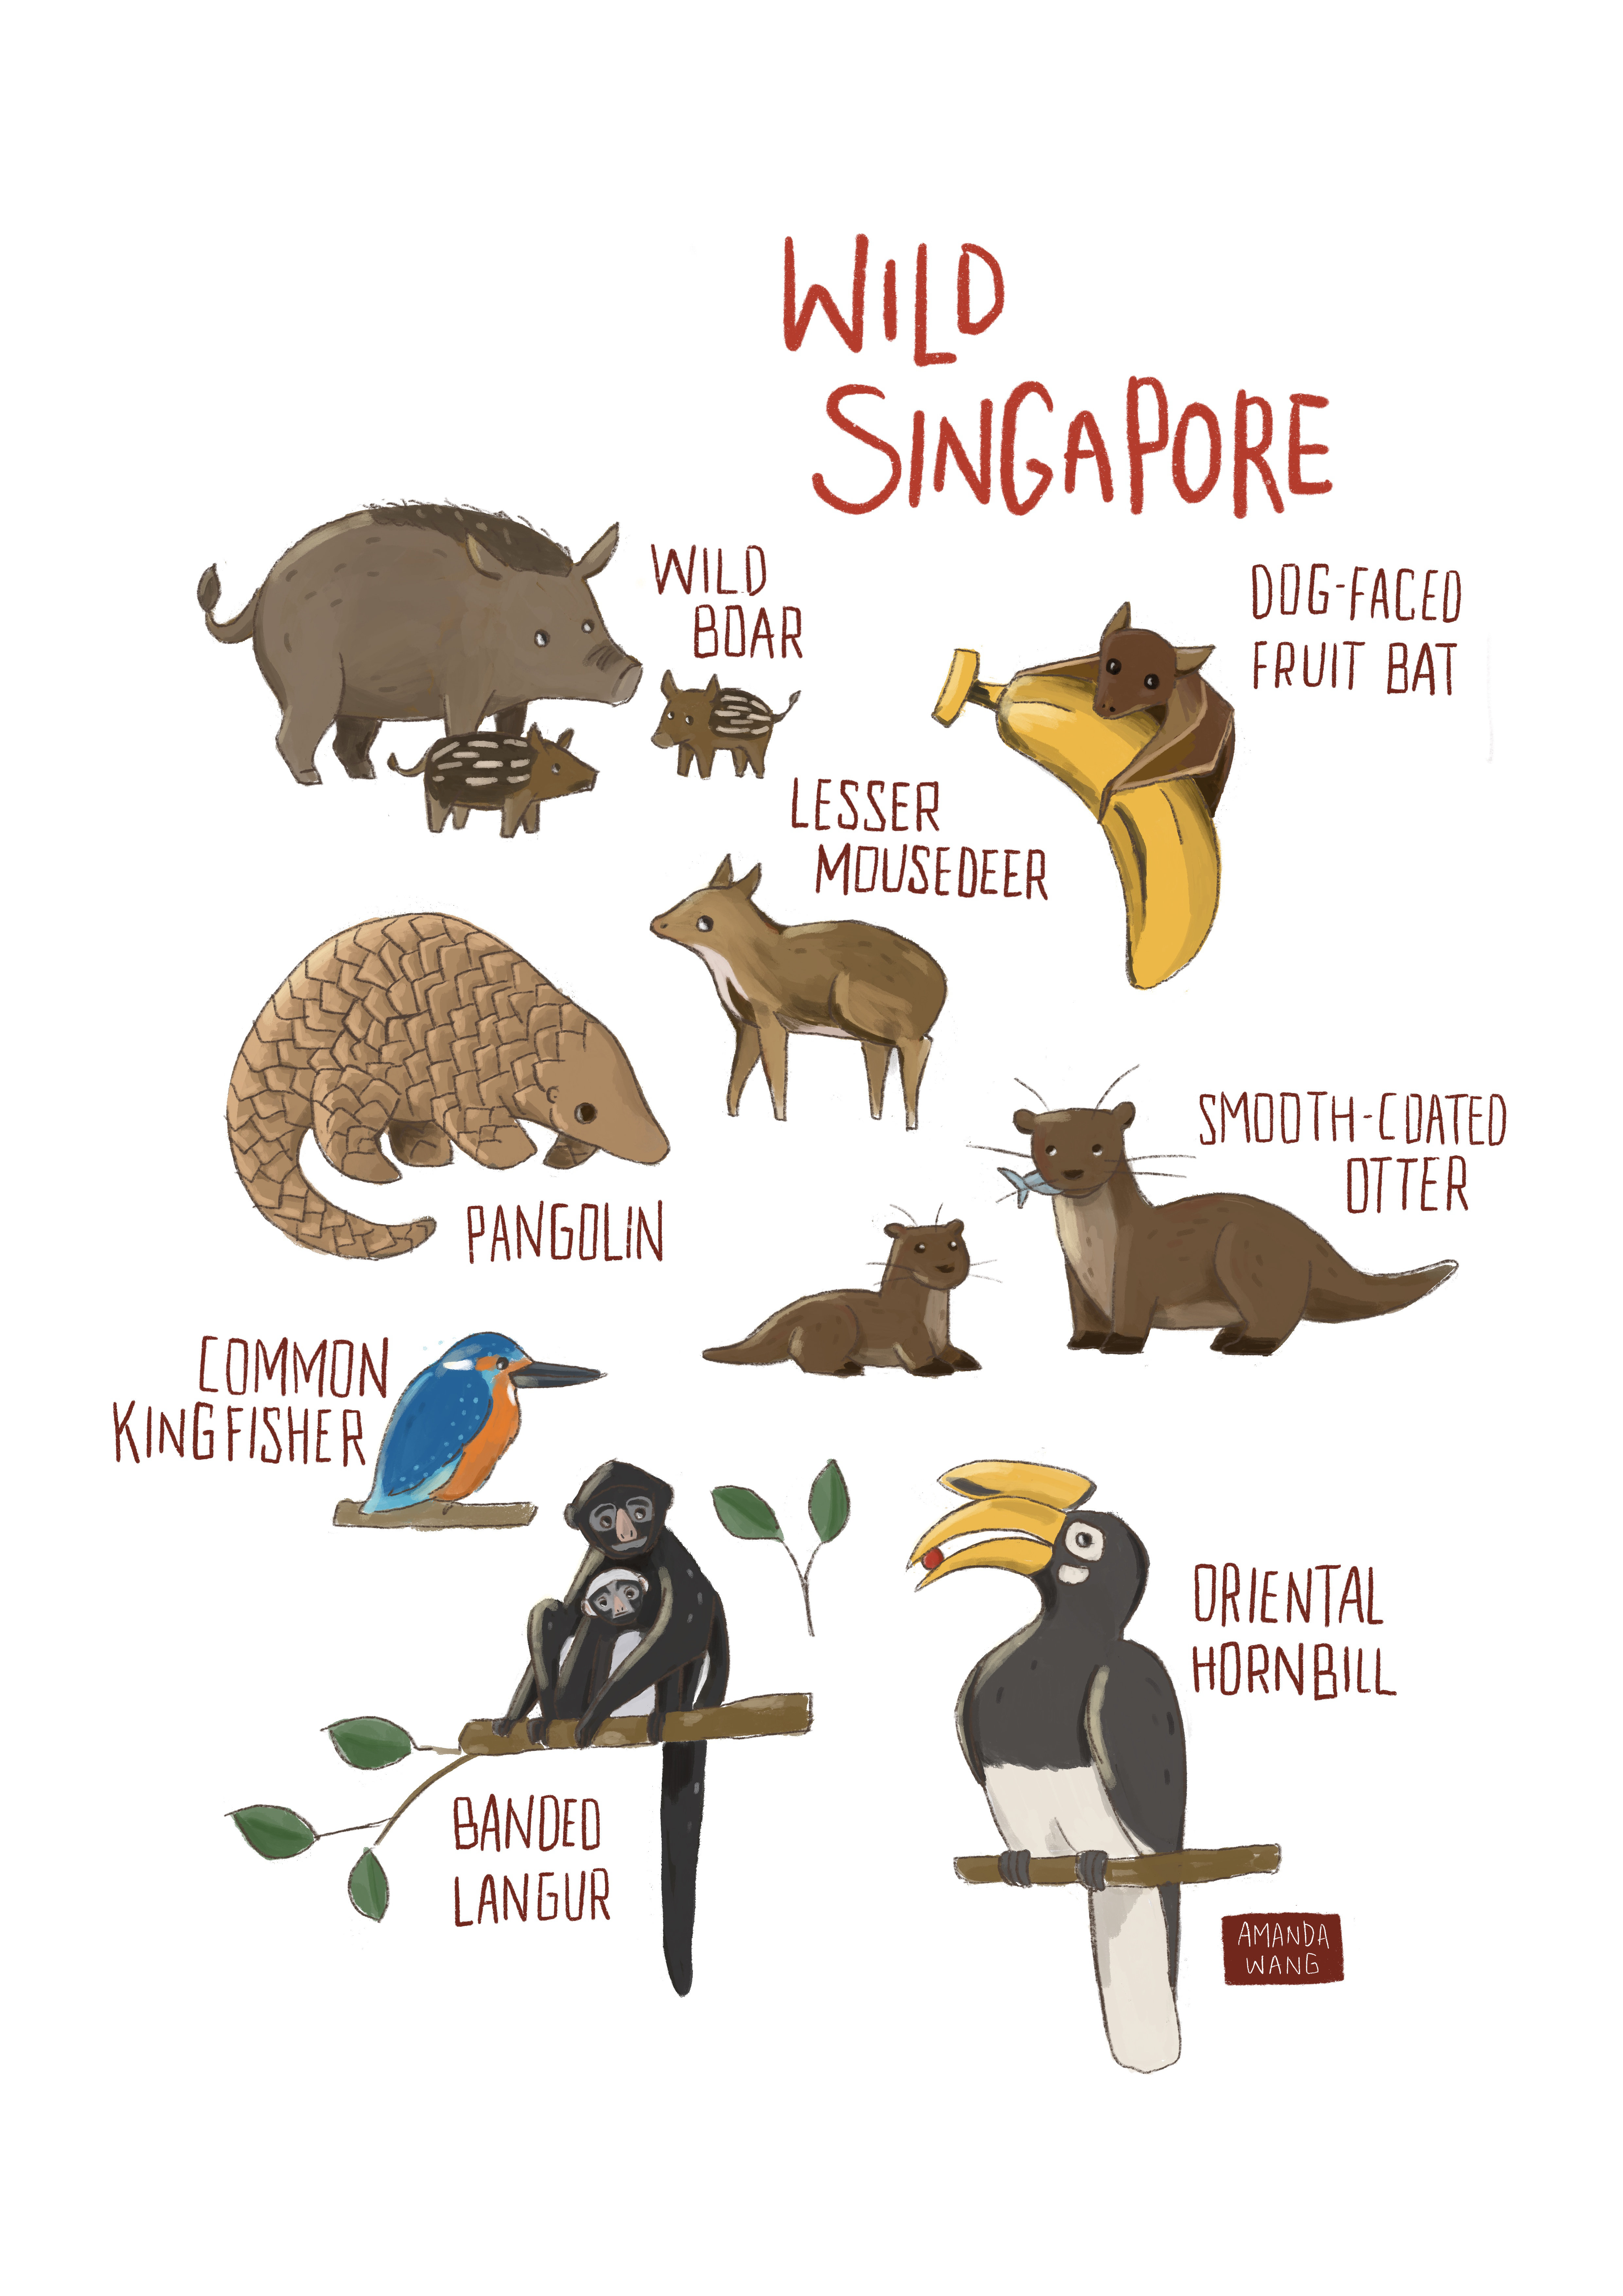 A fun, educational illustrated poster showing some of the wild life Singapore, featuring wild boar, fruit bat, mousedeer, pangolin, otters, hornbill, king fisher, and langur.